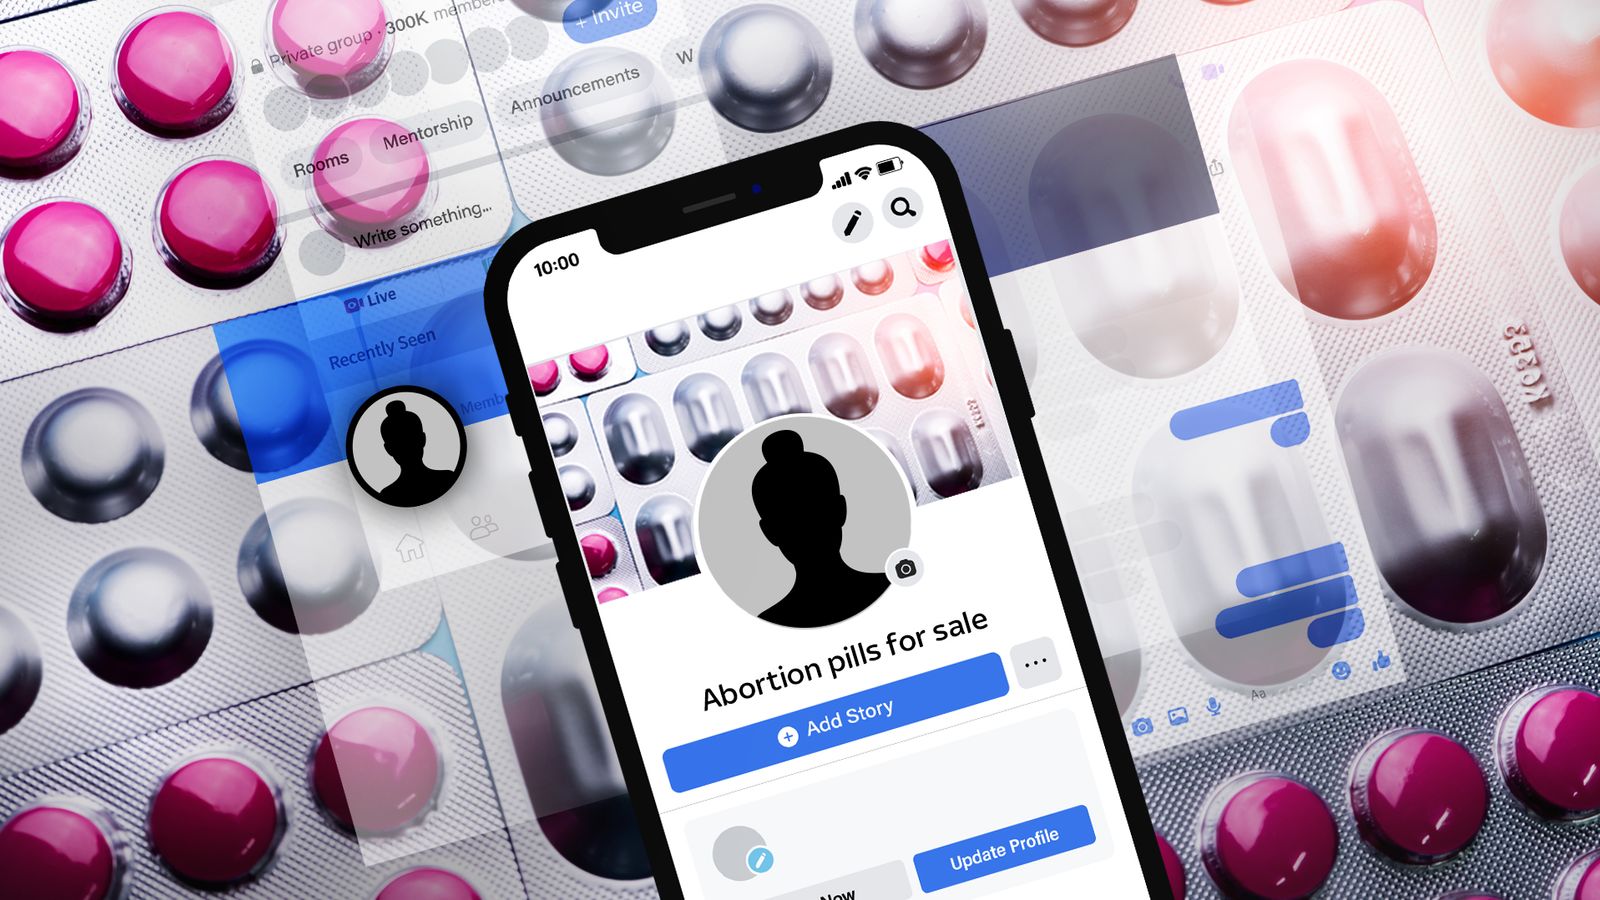 Inside social media's illicit abortion trade - where a late termination costs £350